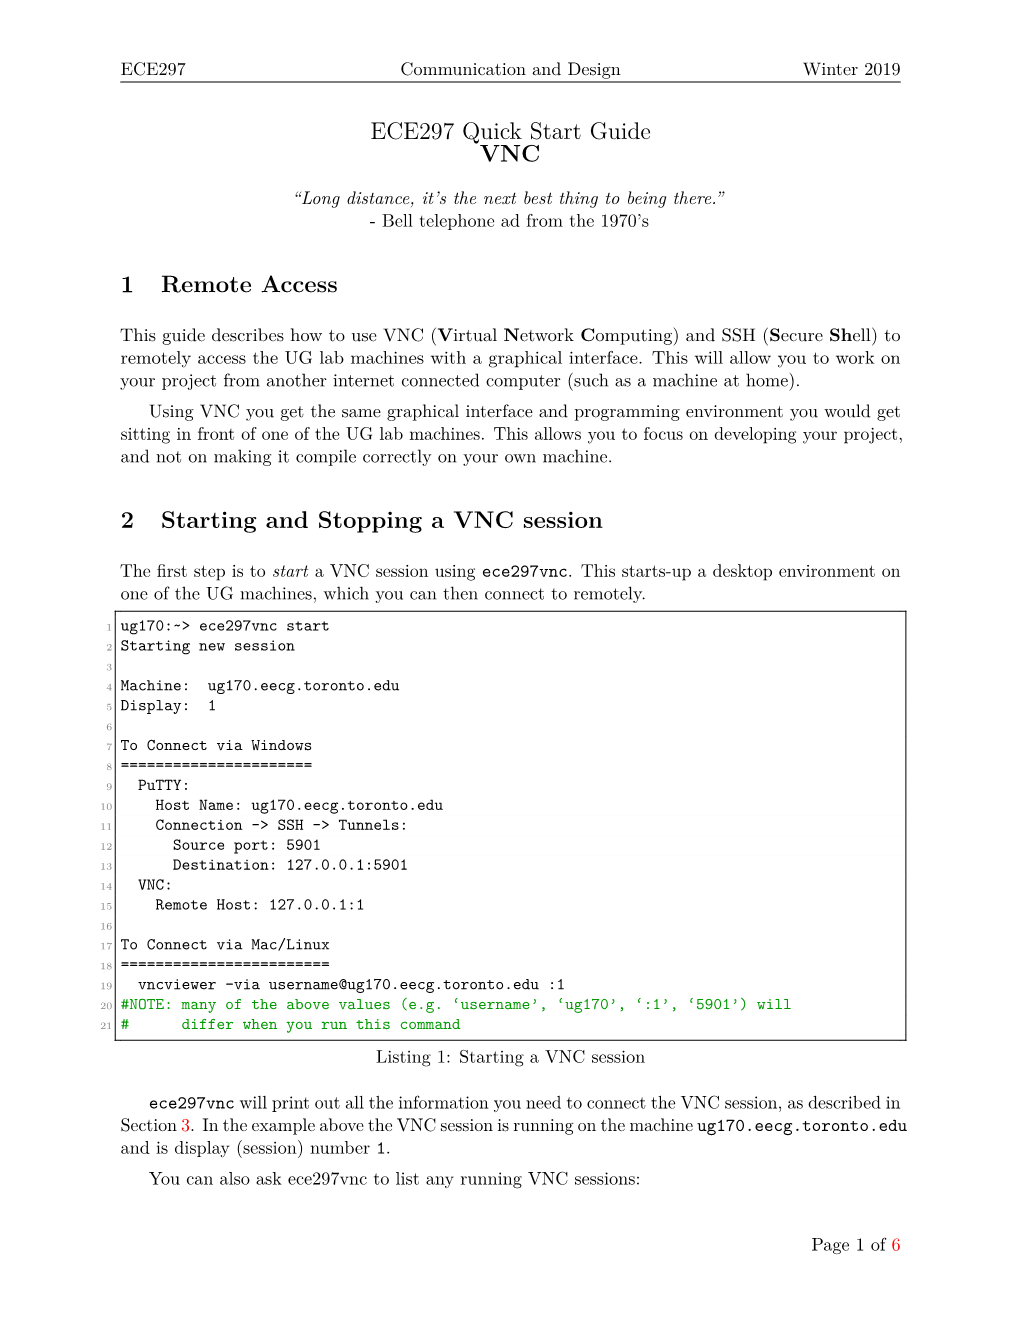 ECE297 Quick Start Guide VNC 1 Remote Access 2 Starting And